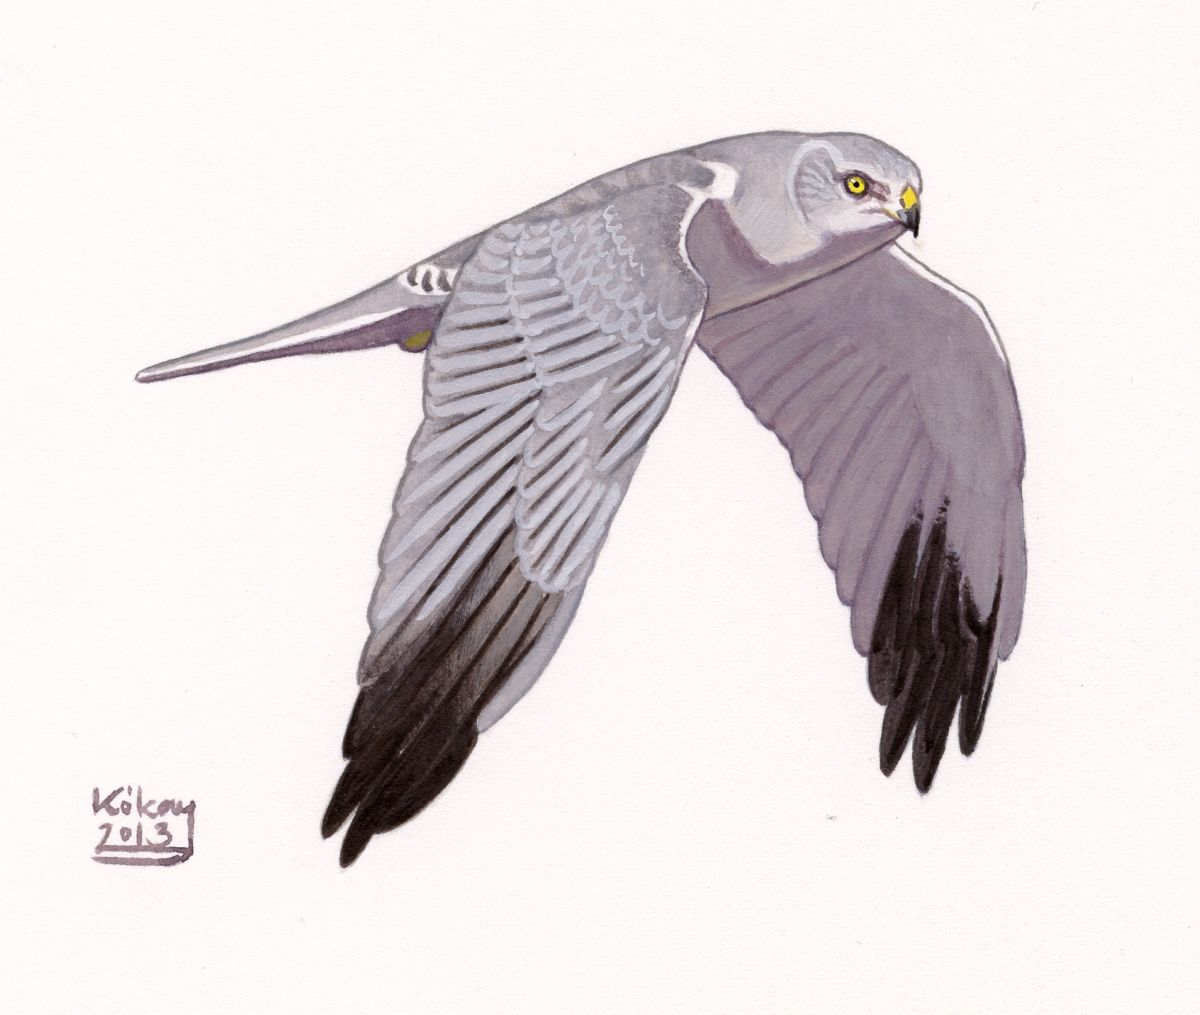 Pallid Harrier (Circus macrourus), watercolour and bodycolour on paper